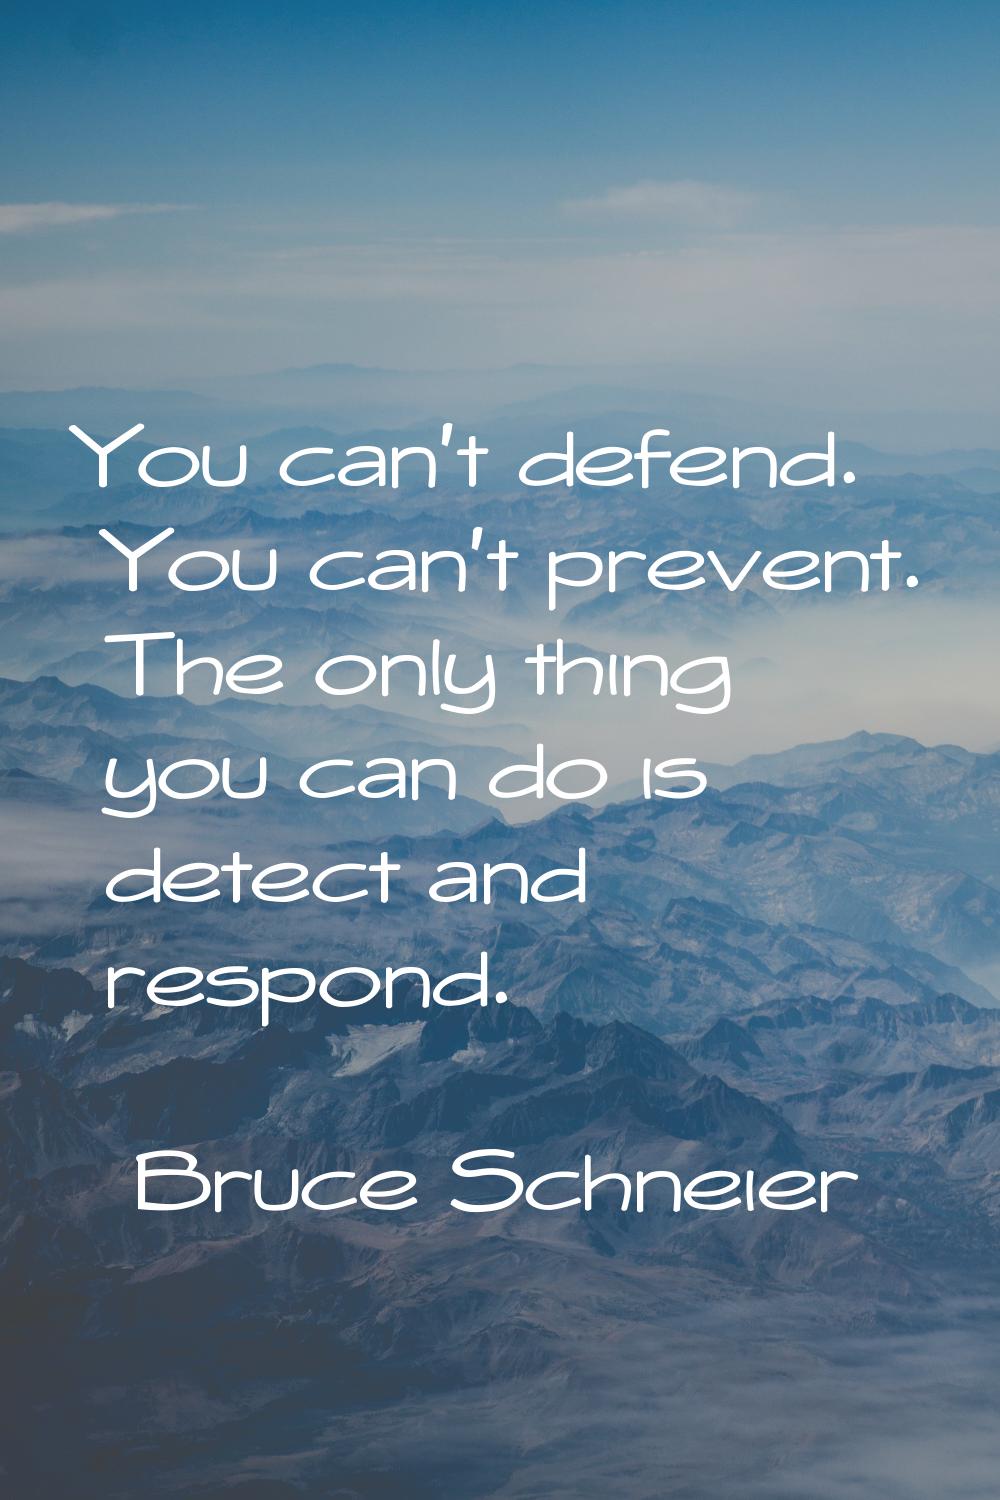 You can't defend. You can't prevent. The only thing you can do is detect and respond.